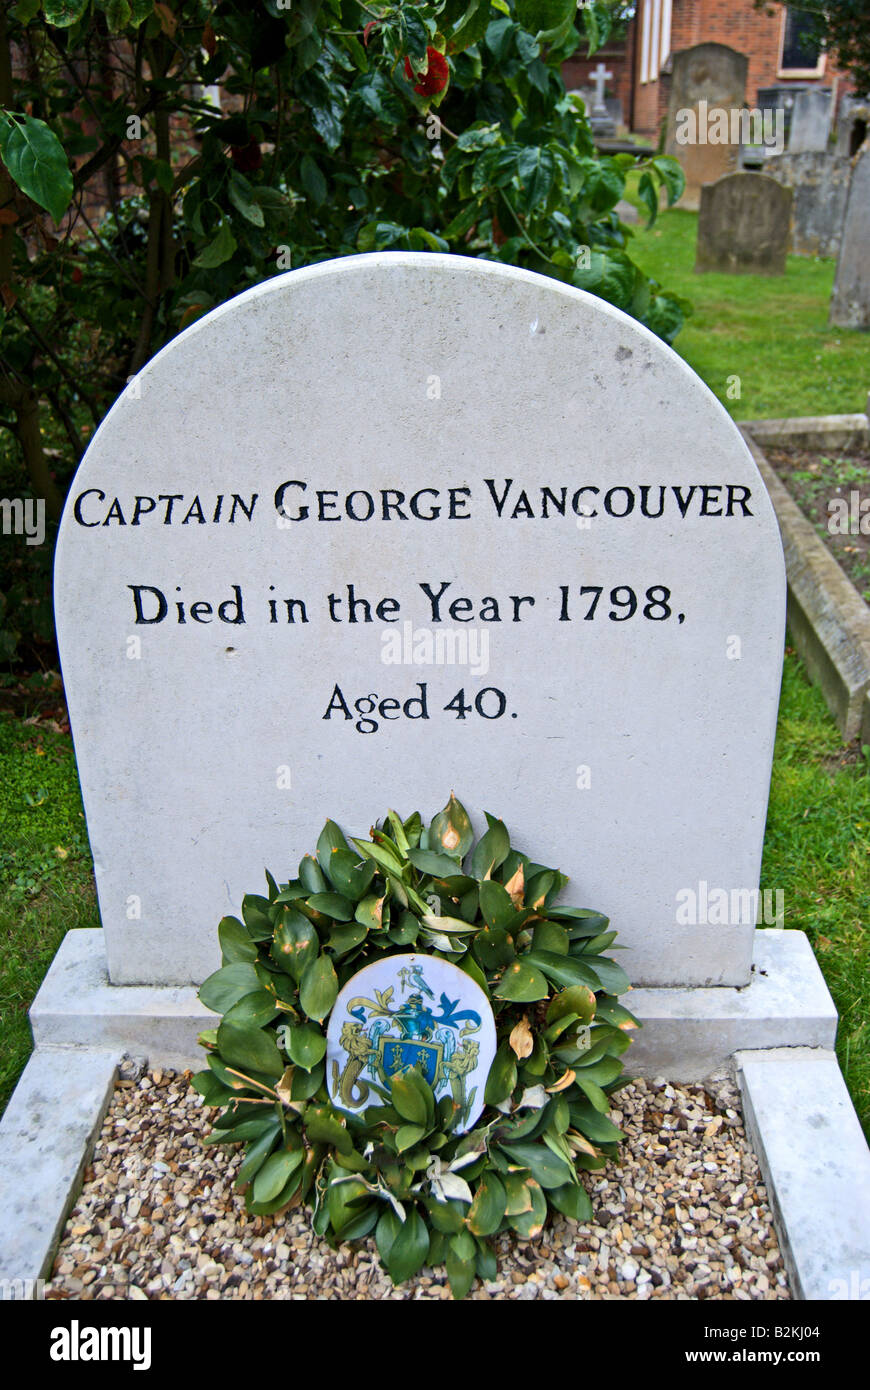 headstone of the grave of british naval officer captain george vancouver at the church of st peter, petersham, surrey, england Stock Photo